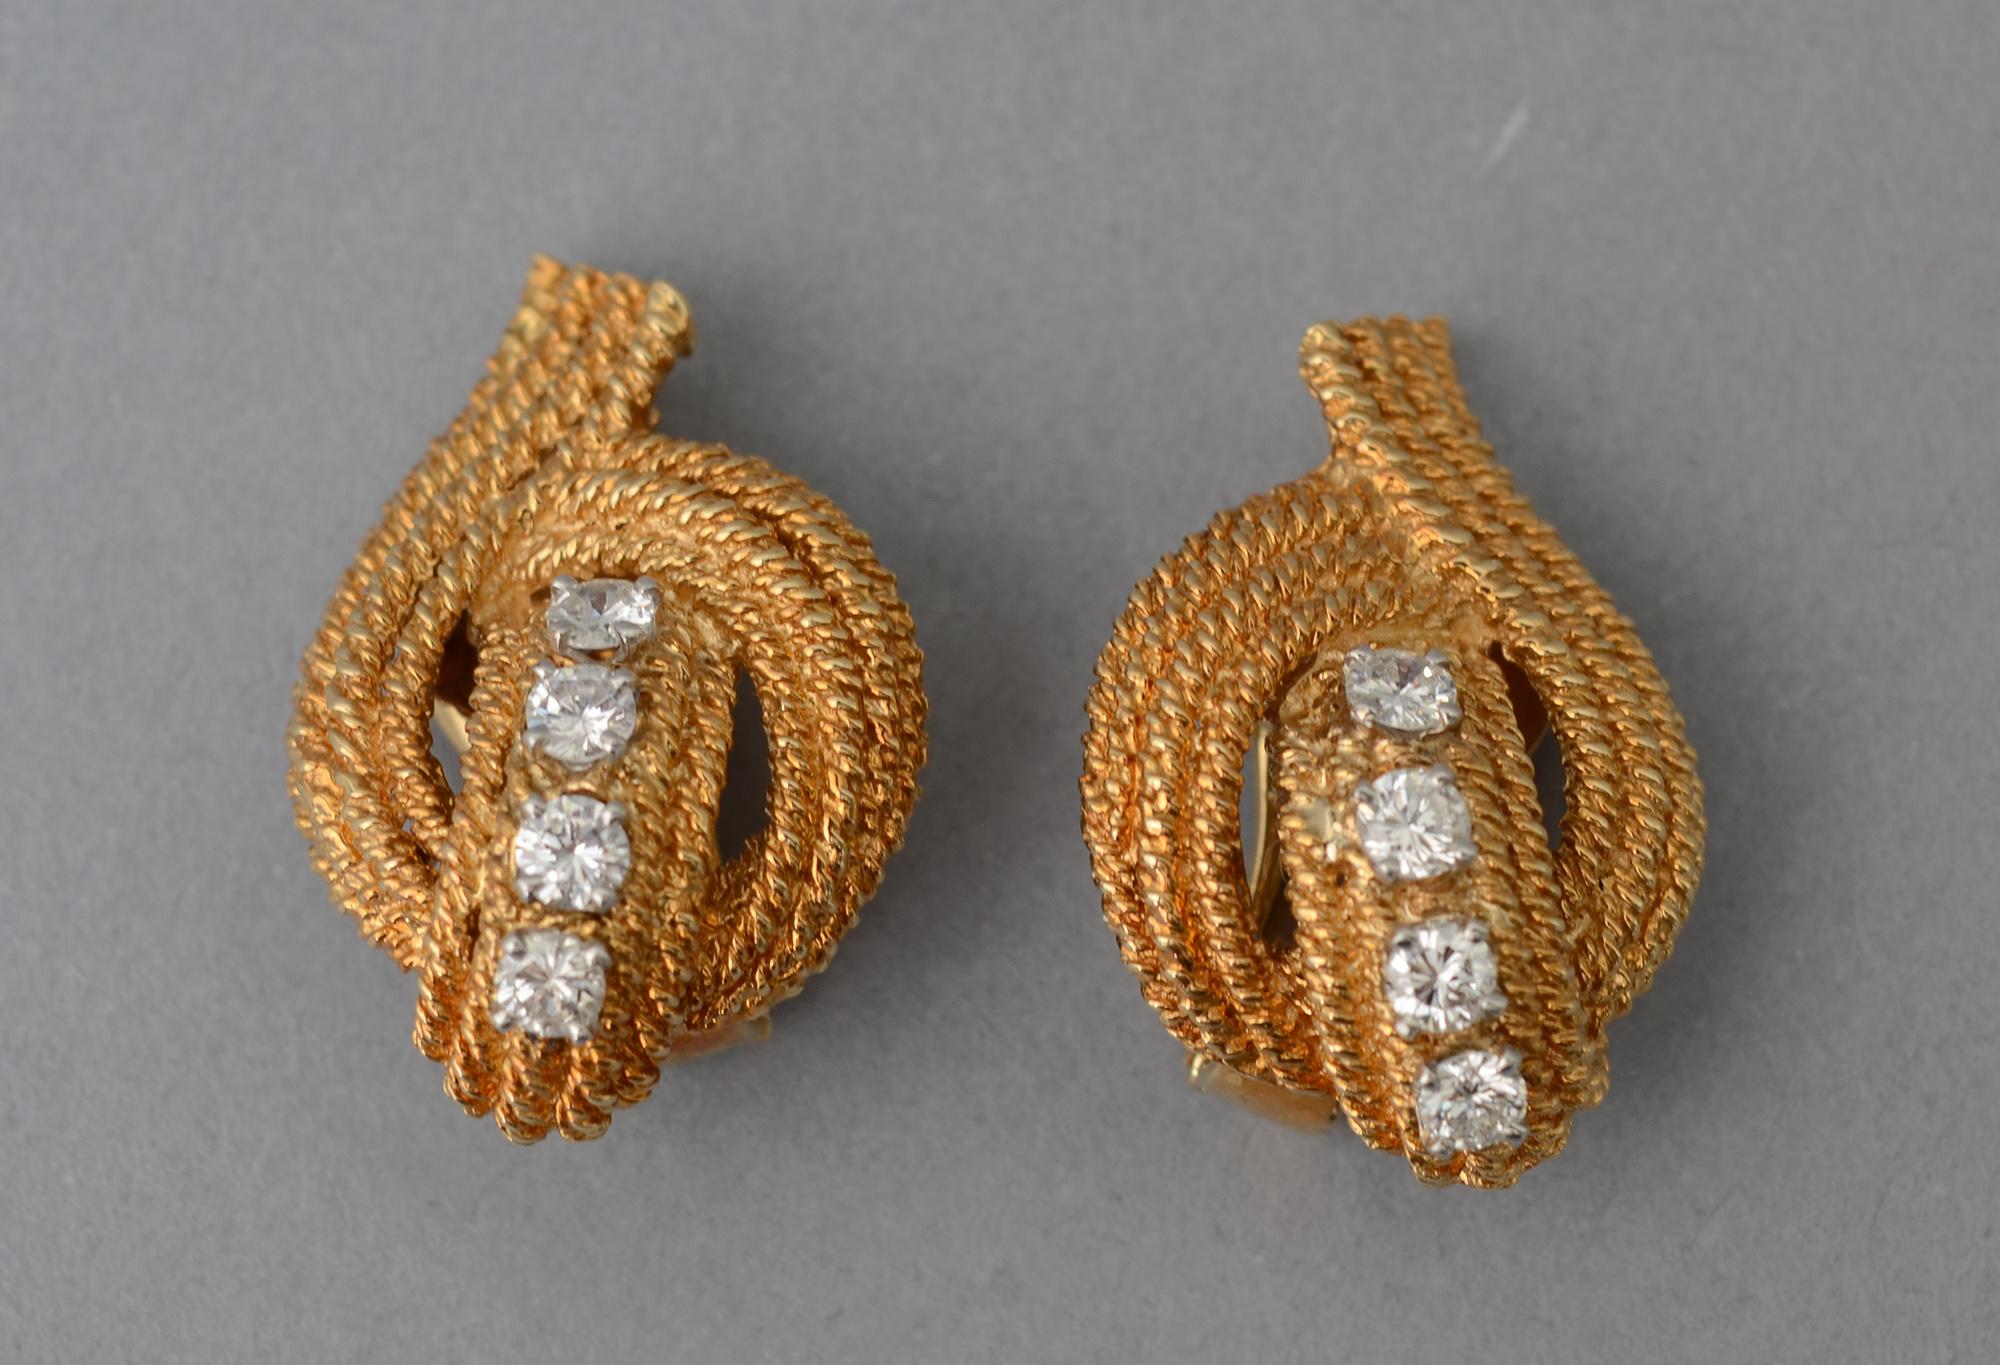 Elegant gold and diamond ear clips by David Webb. Each earring has 4 diamonds with a total weight of approximately 1.25 carats. They are surrounded by three rows of twisted gold in a graceful, uplifting  design.
Clip backs can be converted to posts.